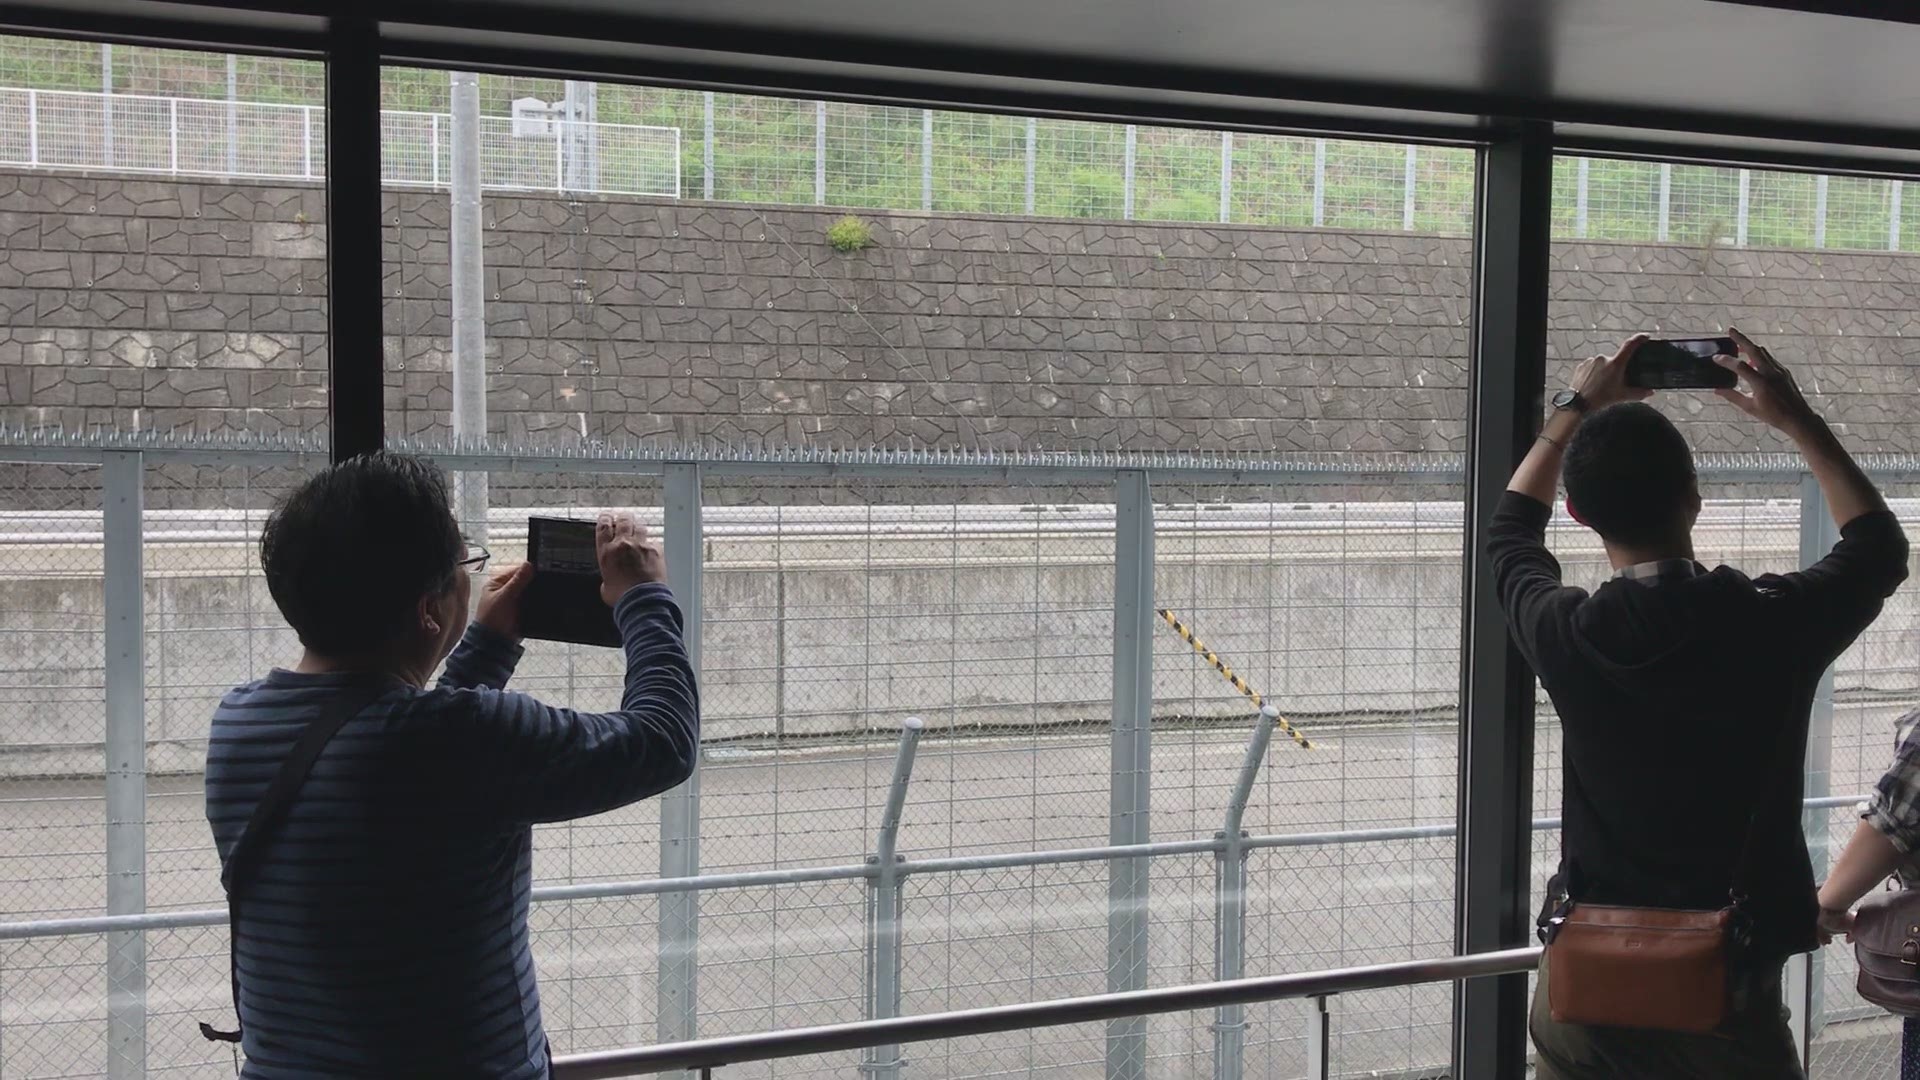 SCMaglev in Japan shoots past spectators in the blink of an eye.